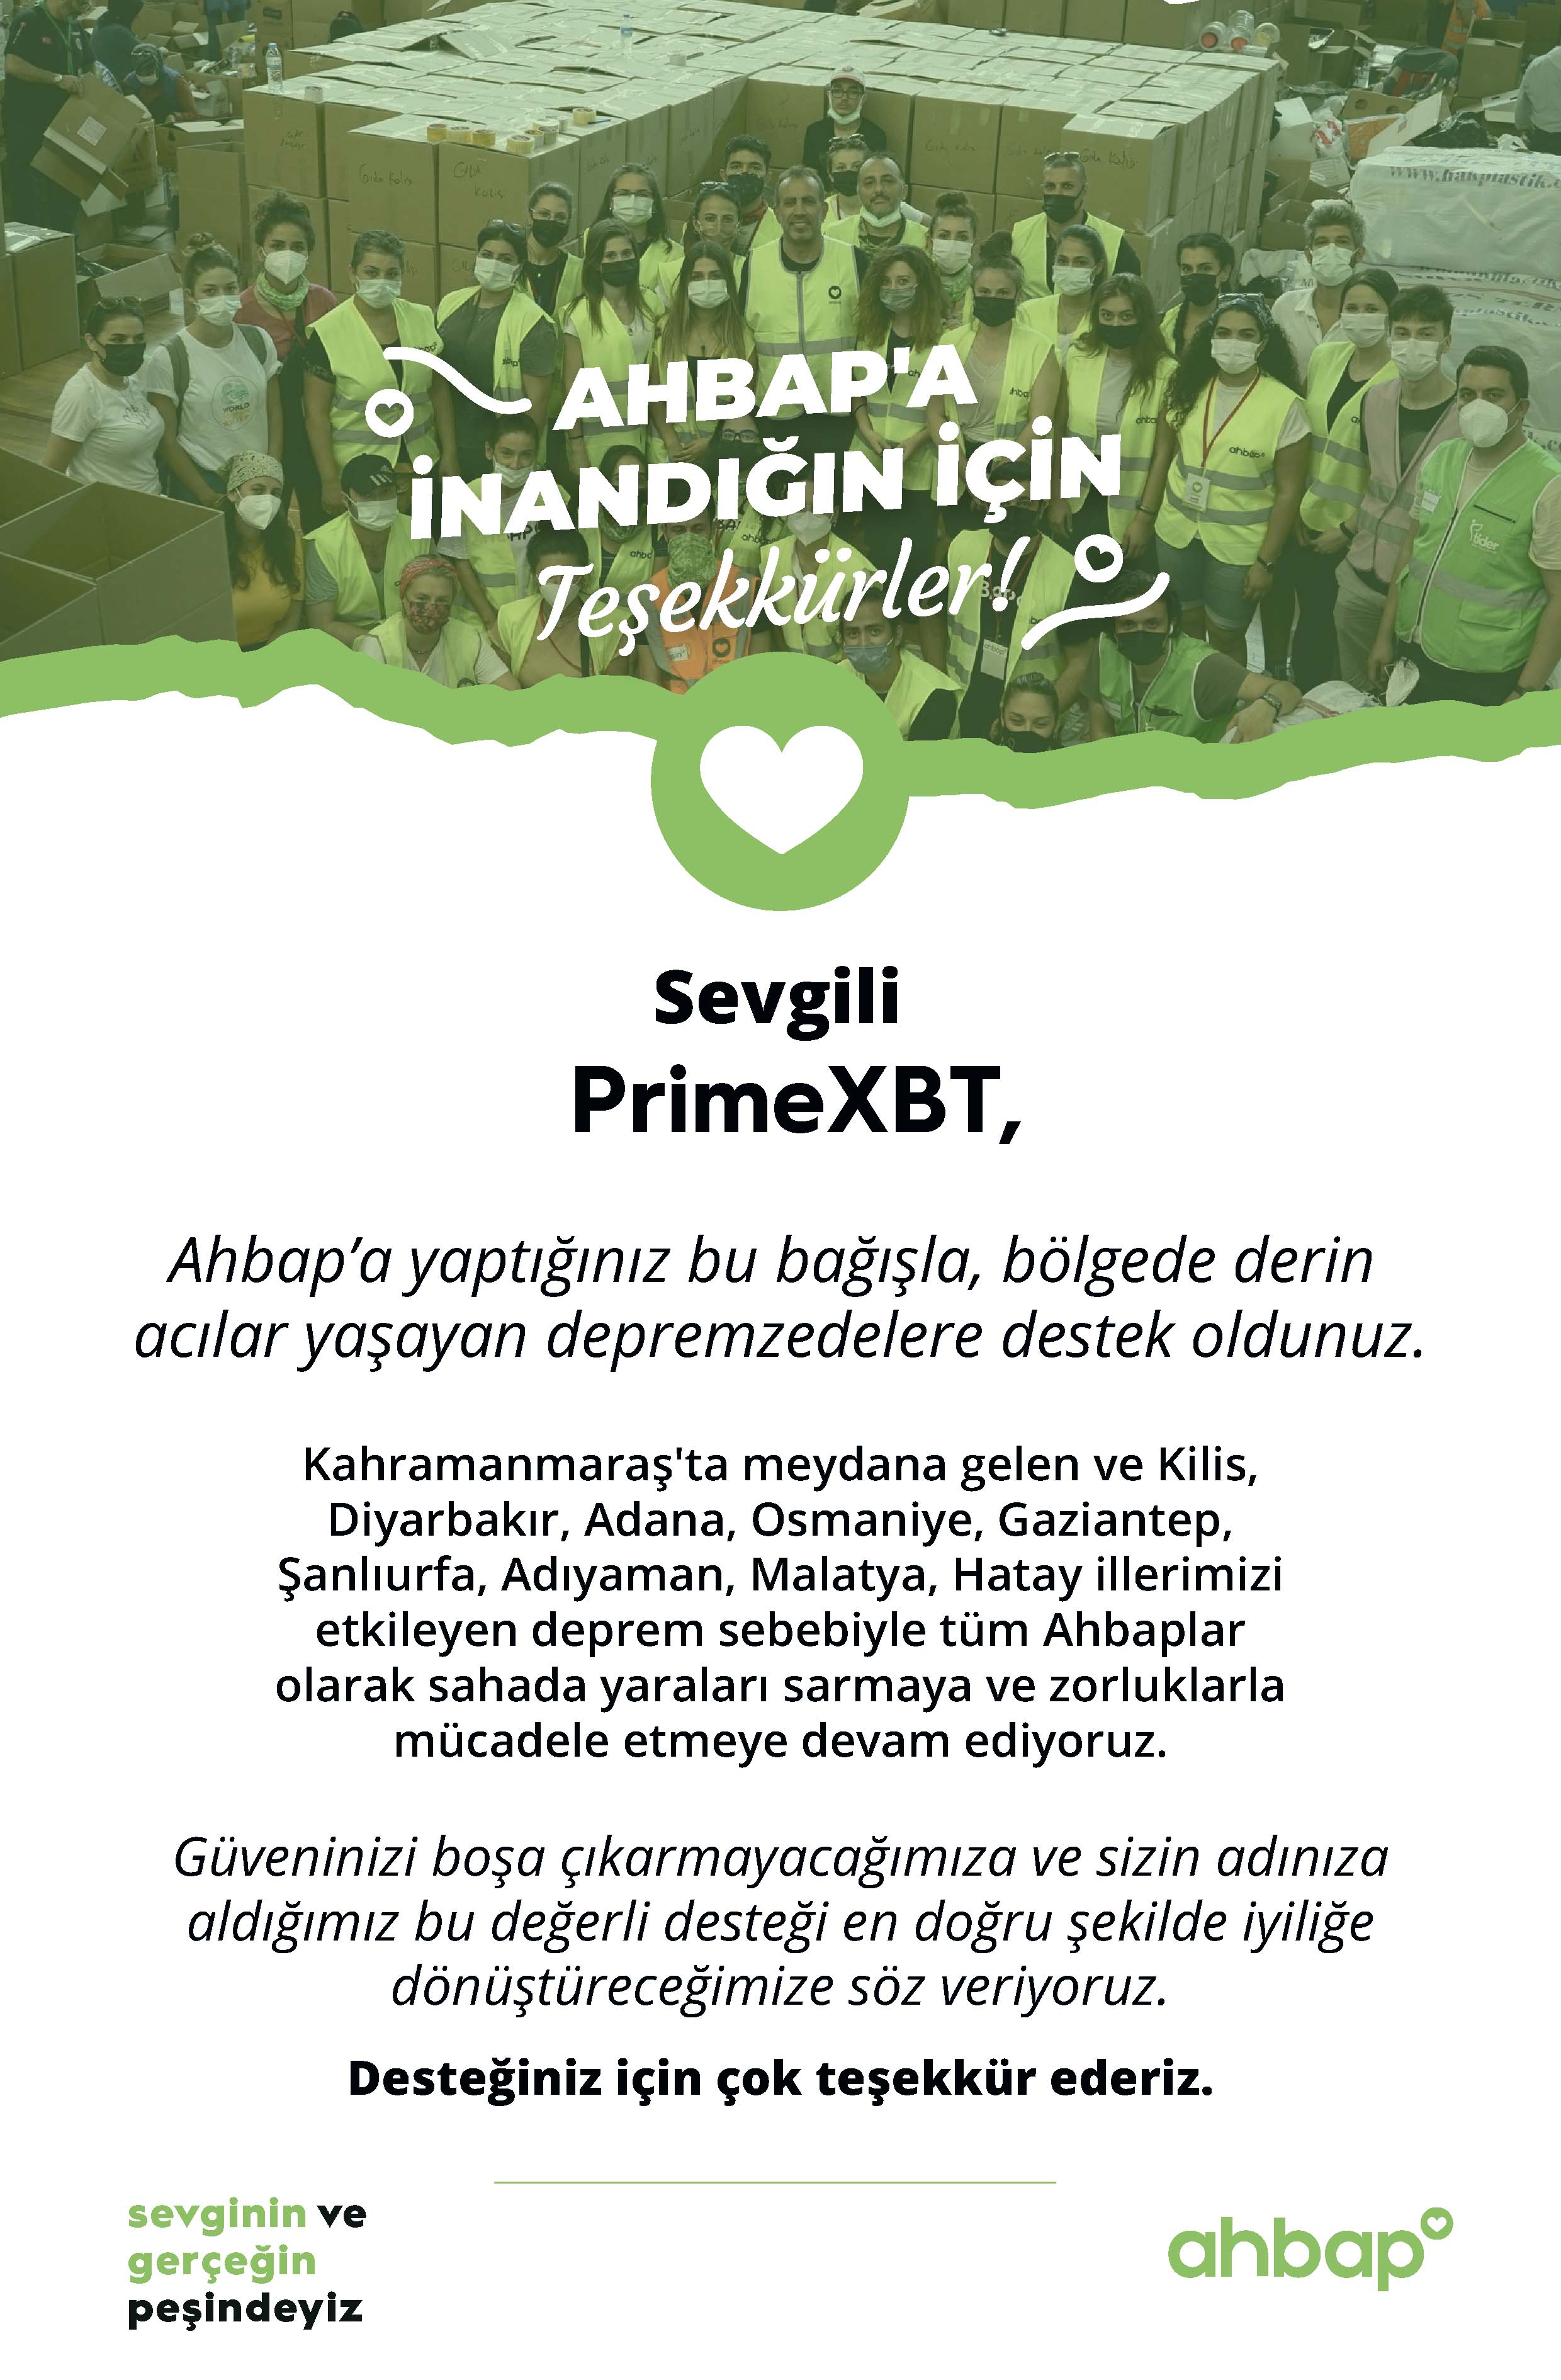 PrimeXBT Trading Platform Makes Disaster Relief Donation To Support Turkey Earthquake Efforts - PrimeXBT